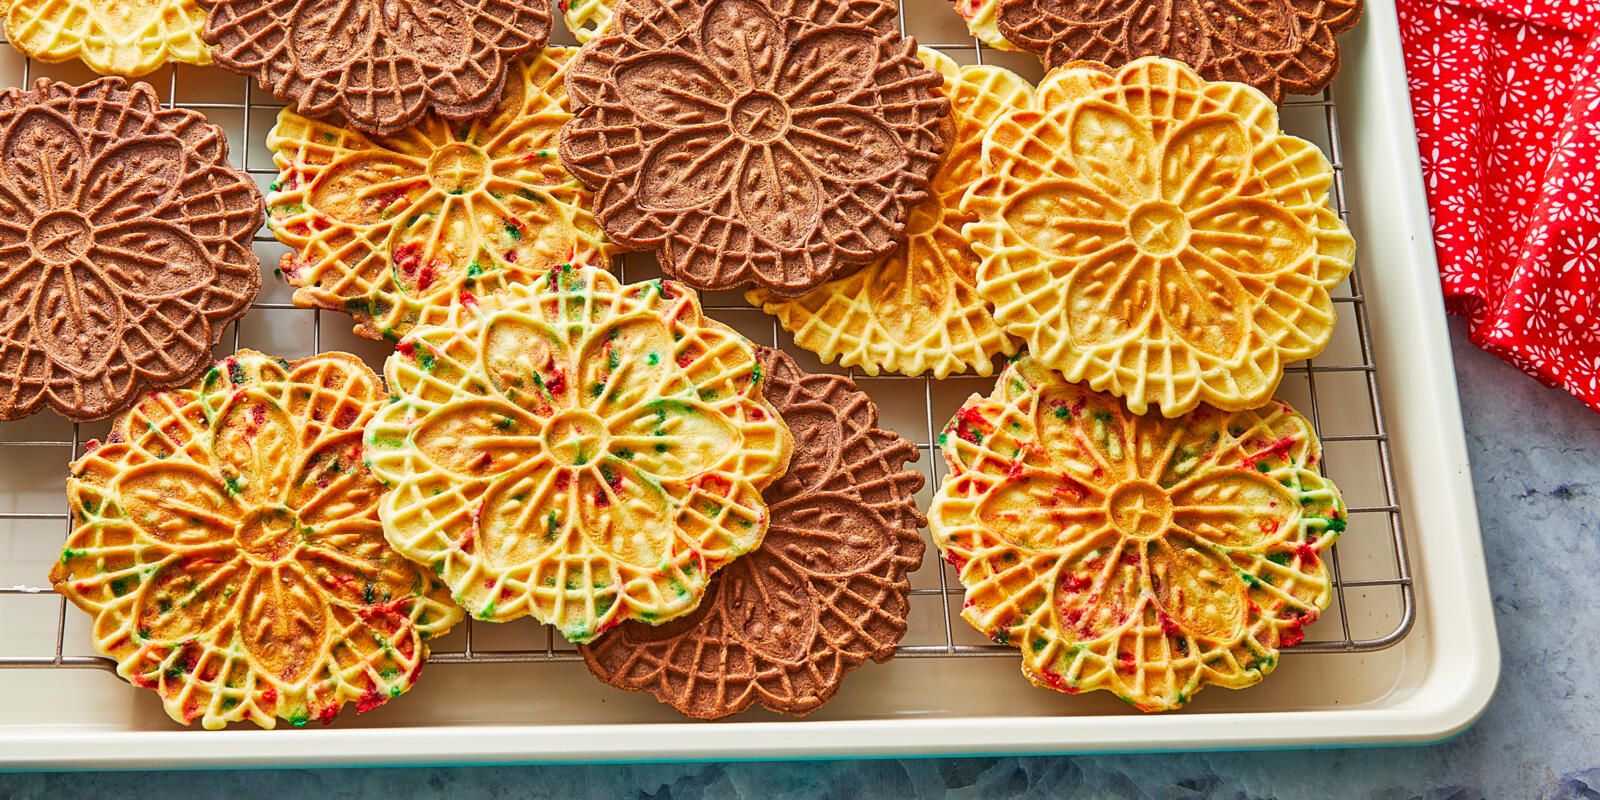 The 6 Best Pizzelle Makers of 2024